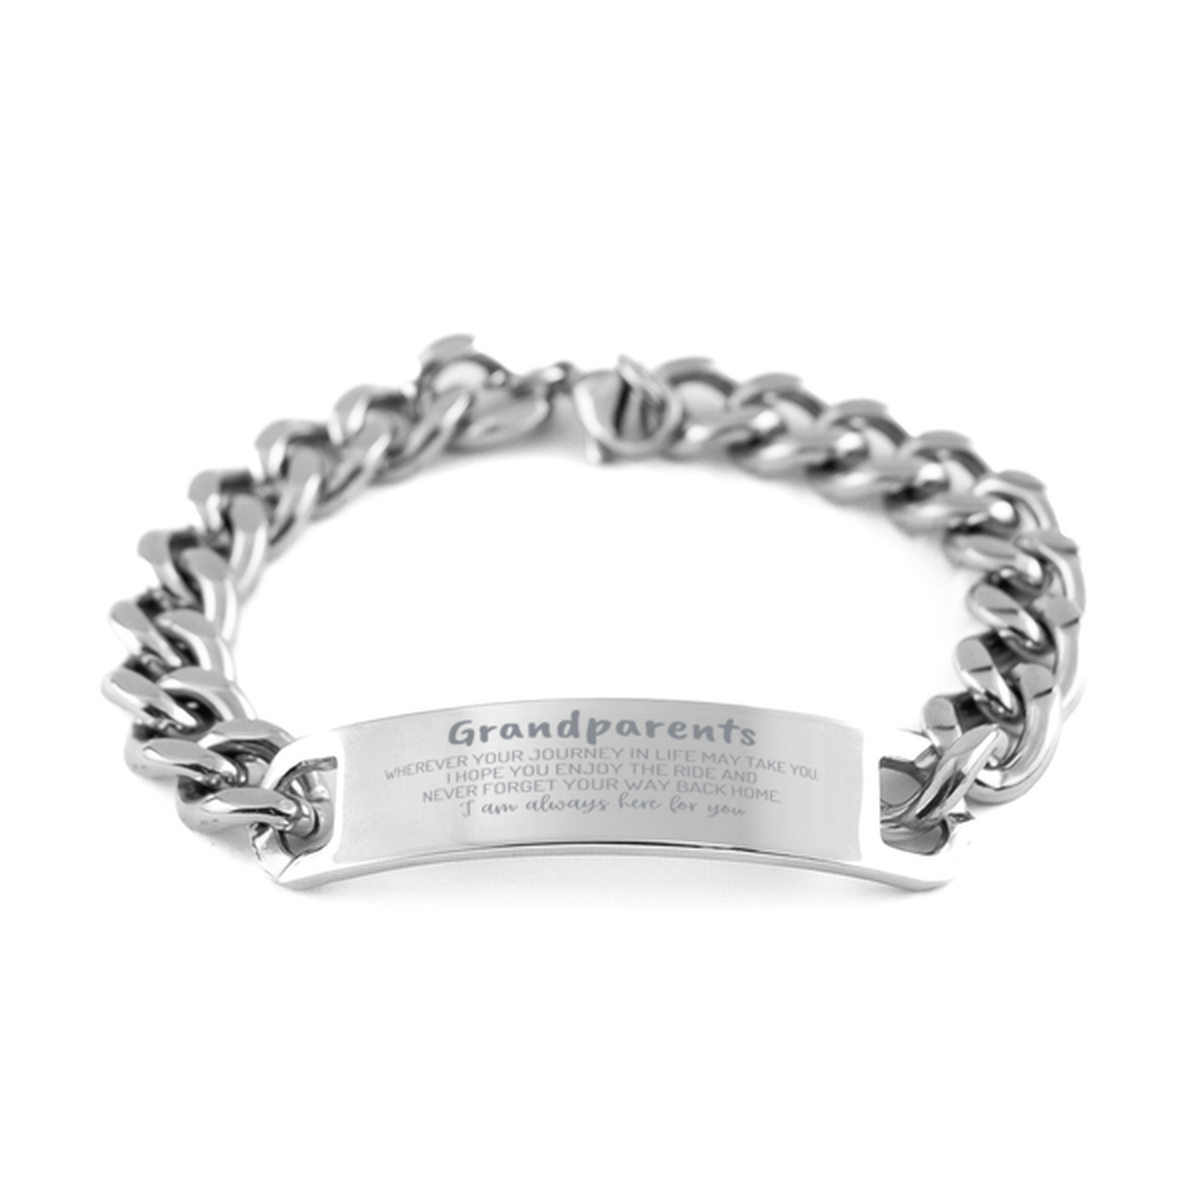 Grandparents wherever your journey in life may take you, I am always here for you Grandparents Cuban Chain Stainless Steel Bracelet, Awesome Christmas Gifts For Grandparents, Grandparents Birthday Gifts for Men Women Family Loved One